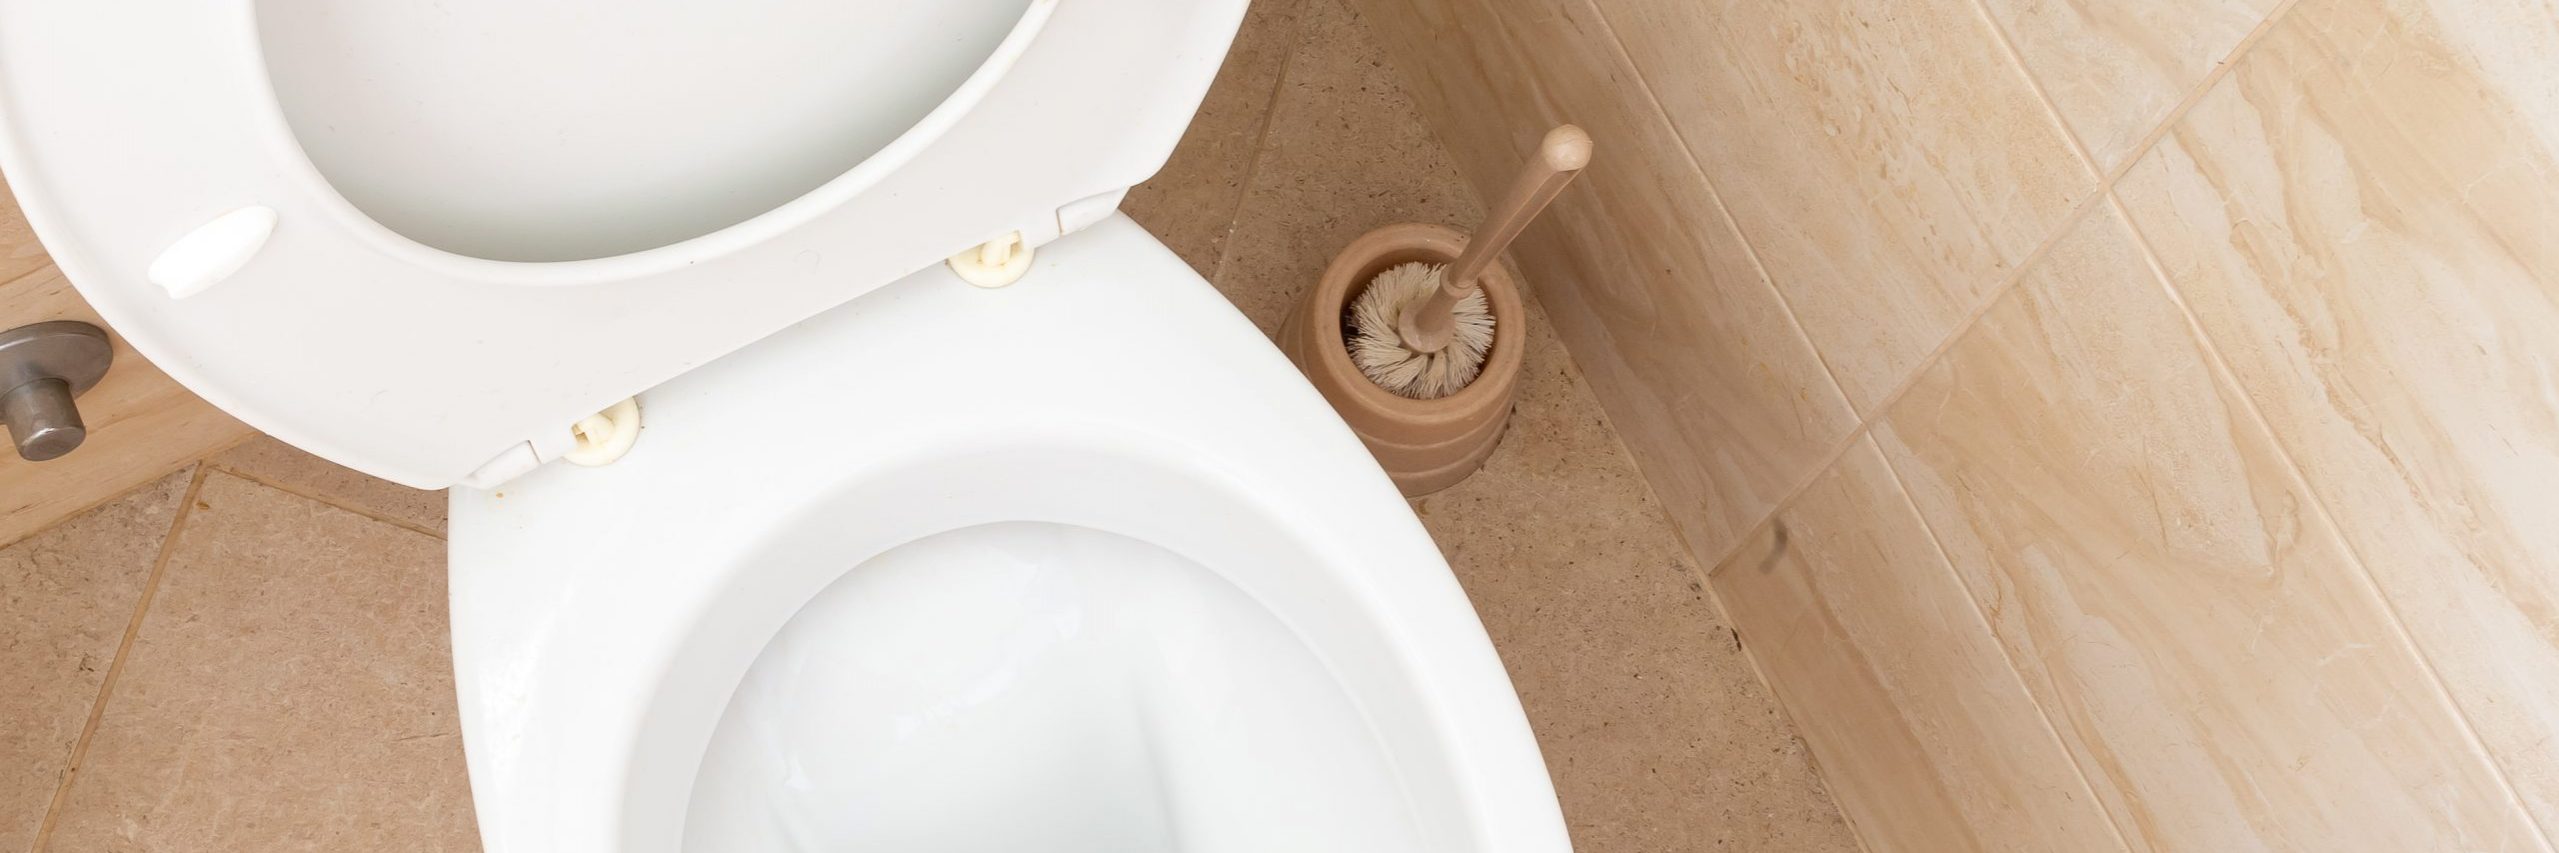 Toilet bowl with plunger beside it